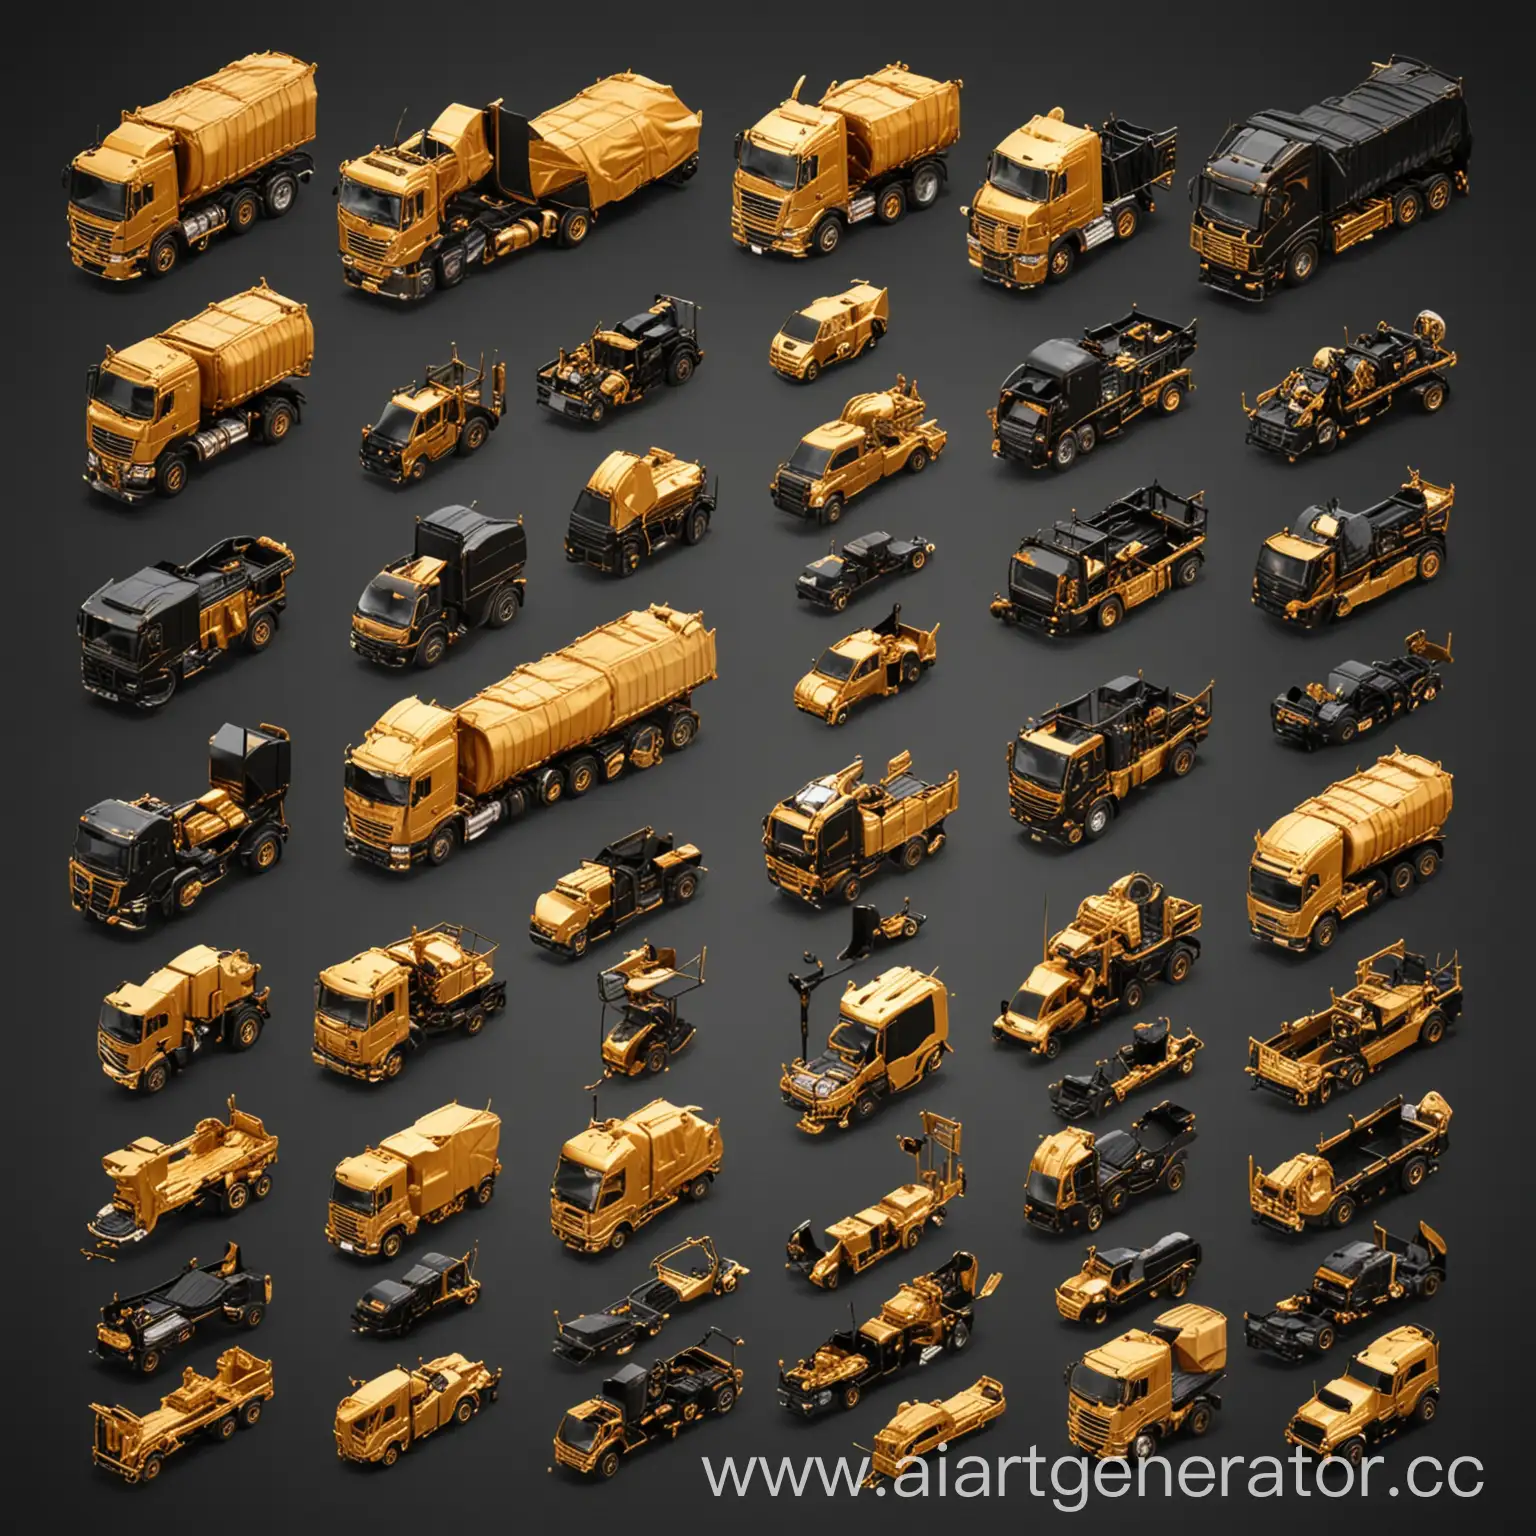 Cargo-Truck-Spare-Parts-in-Gold-and-Black-Colors